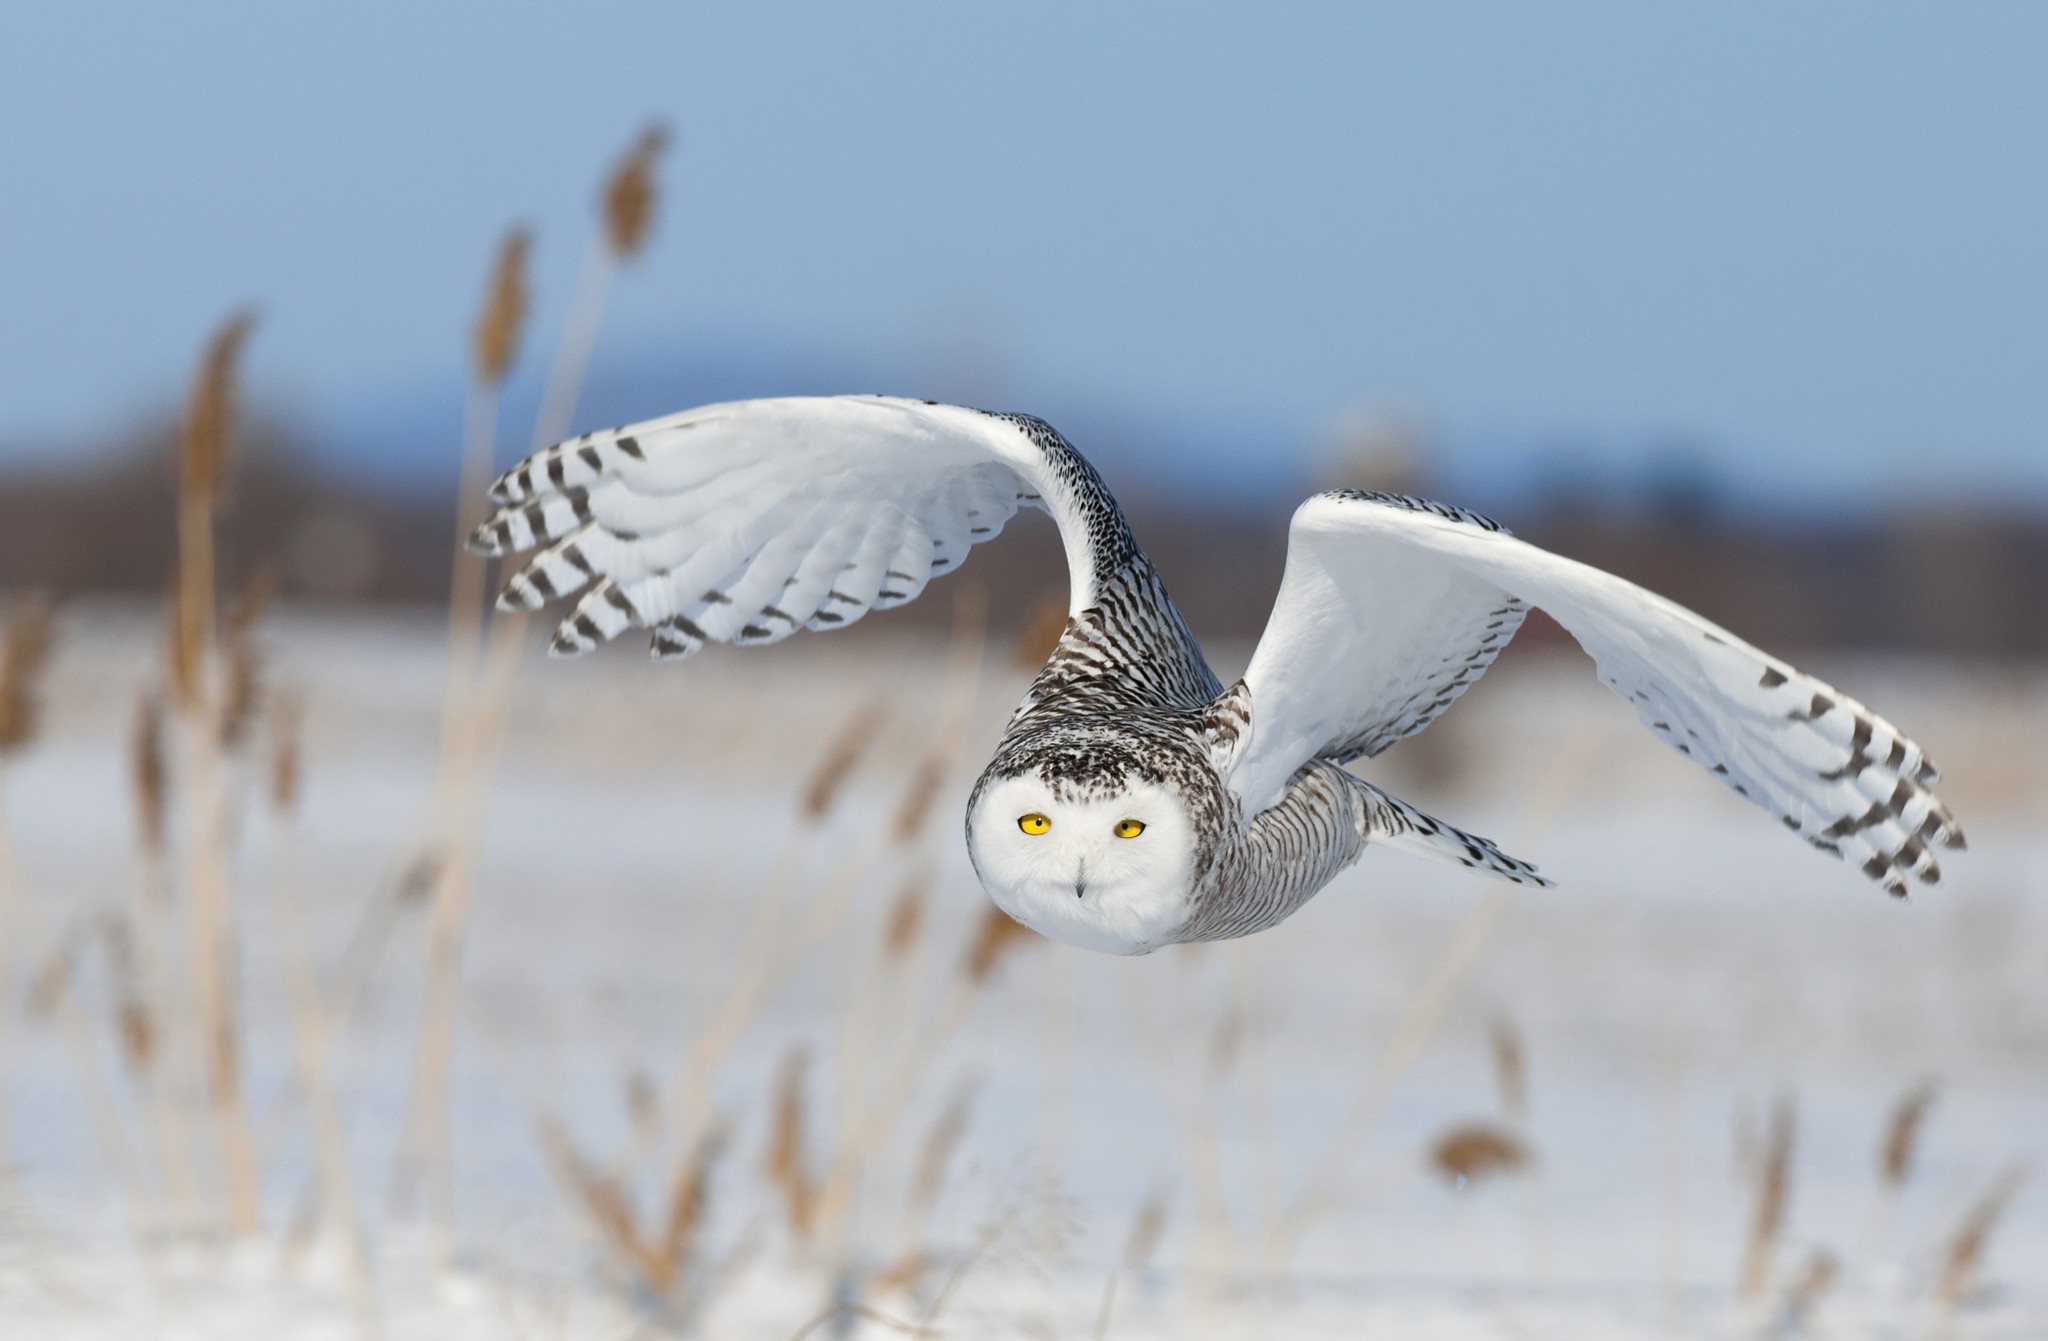 General 2048x1341 nature animals birds flying landscape owl yellow eyes winter snow feathers wings animal eyes outdoors